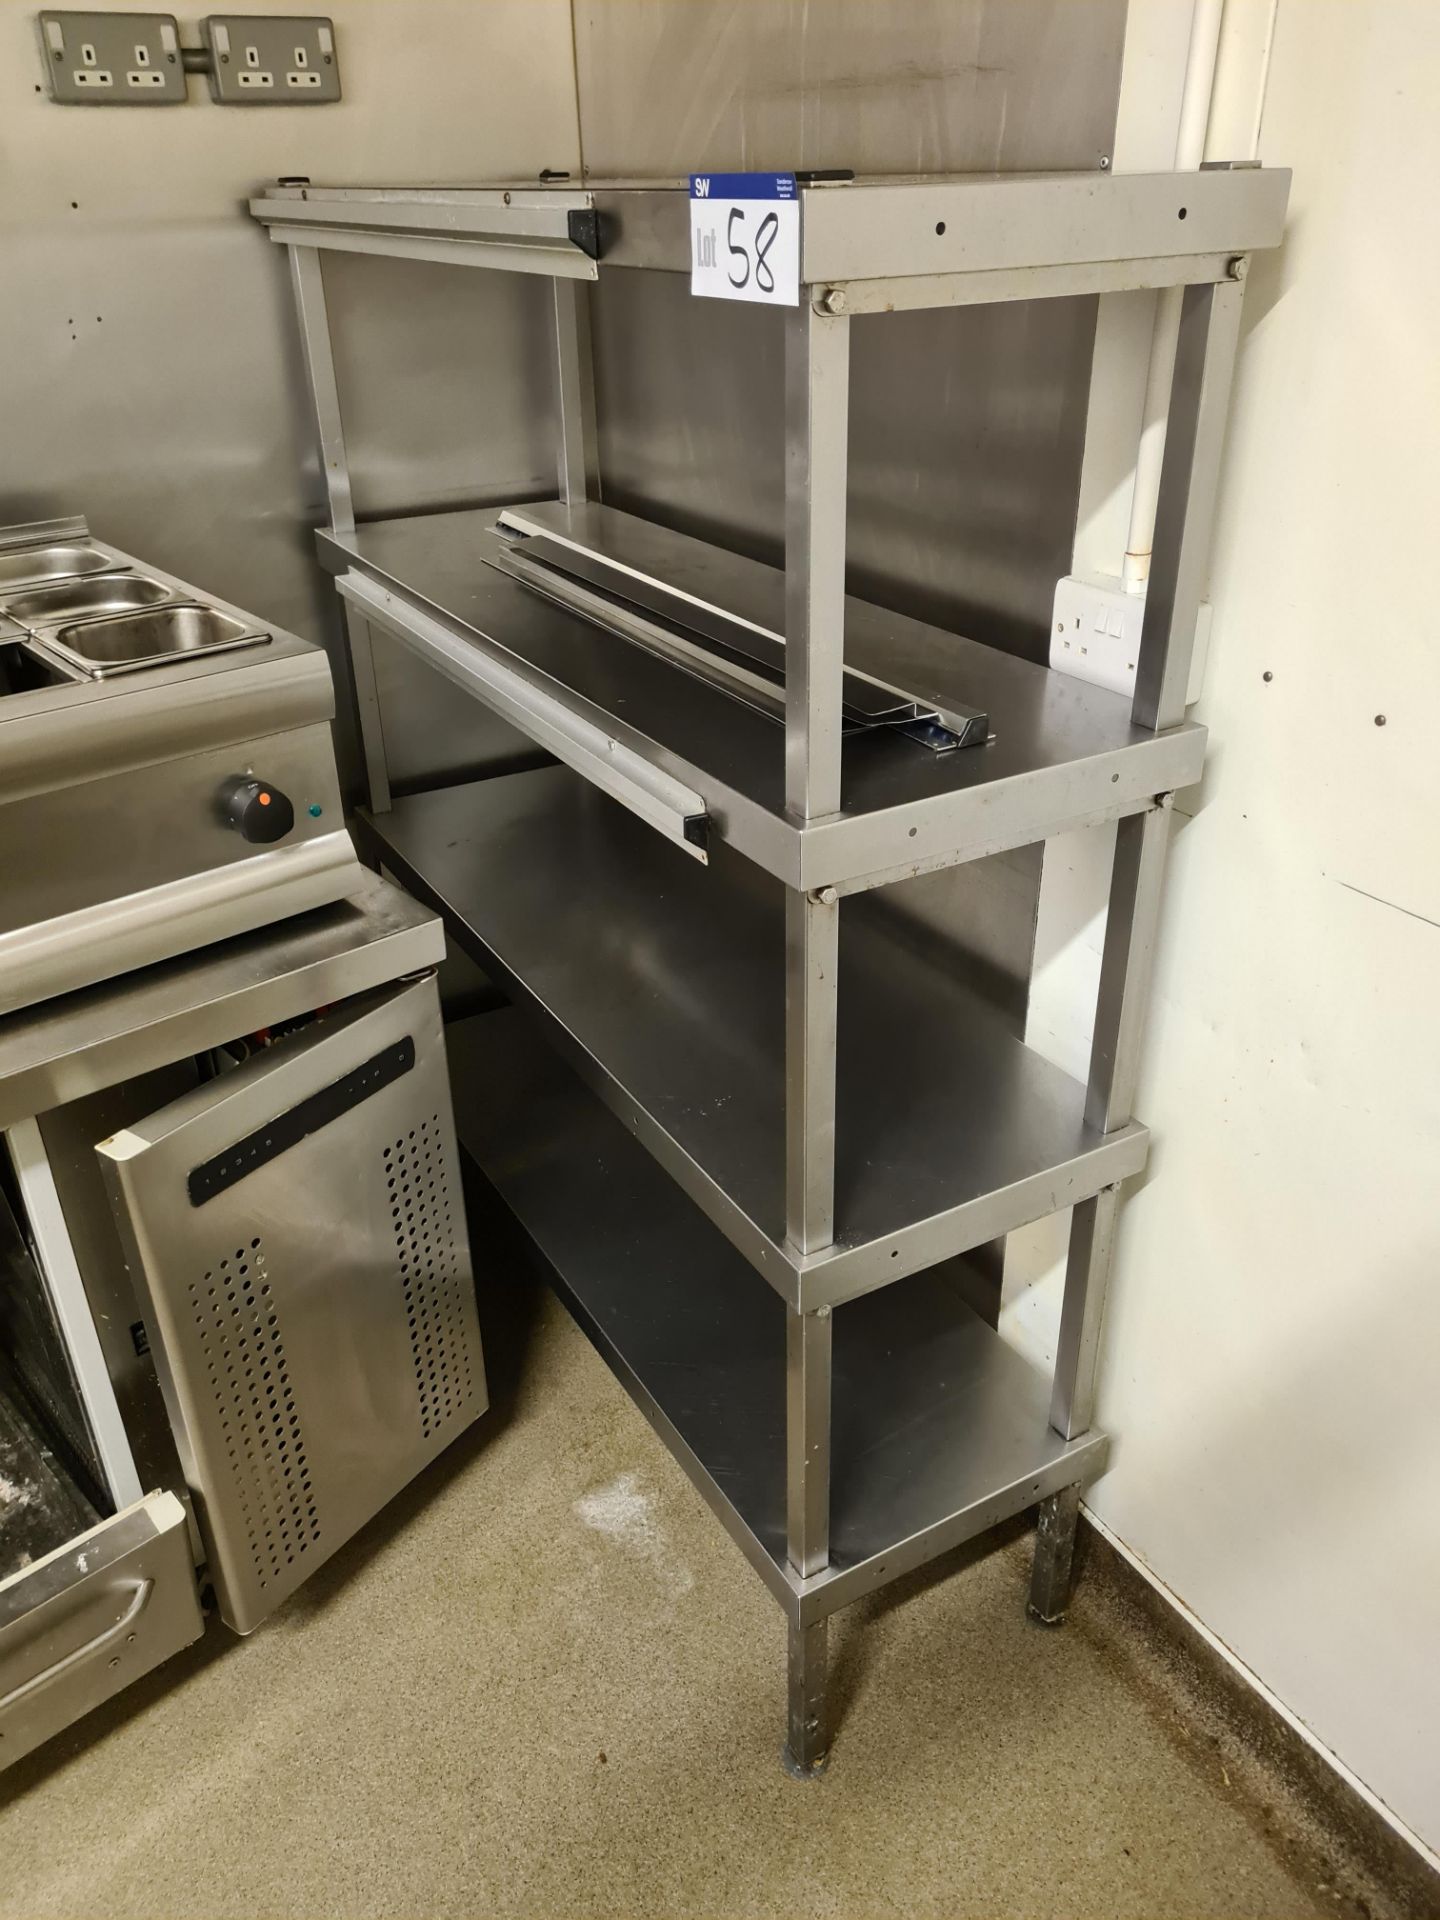 Stainless Steel Four Tier Shelving Unit, Approx. 1.2m (L) x 0.4m (W) x 1.5m (H)